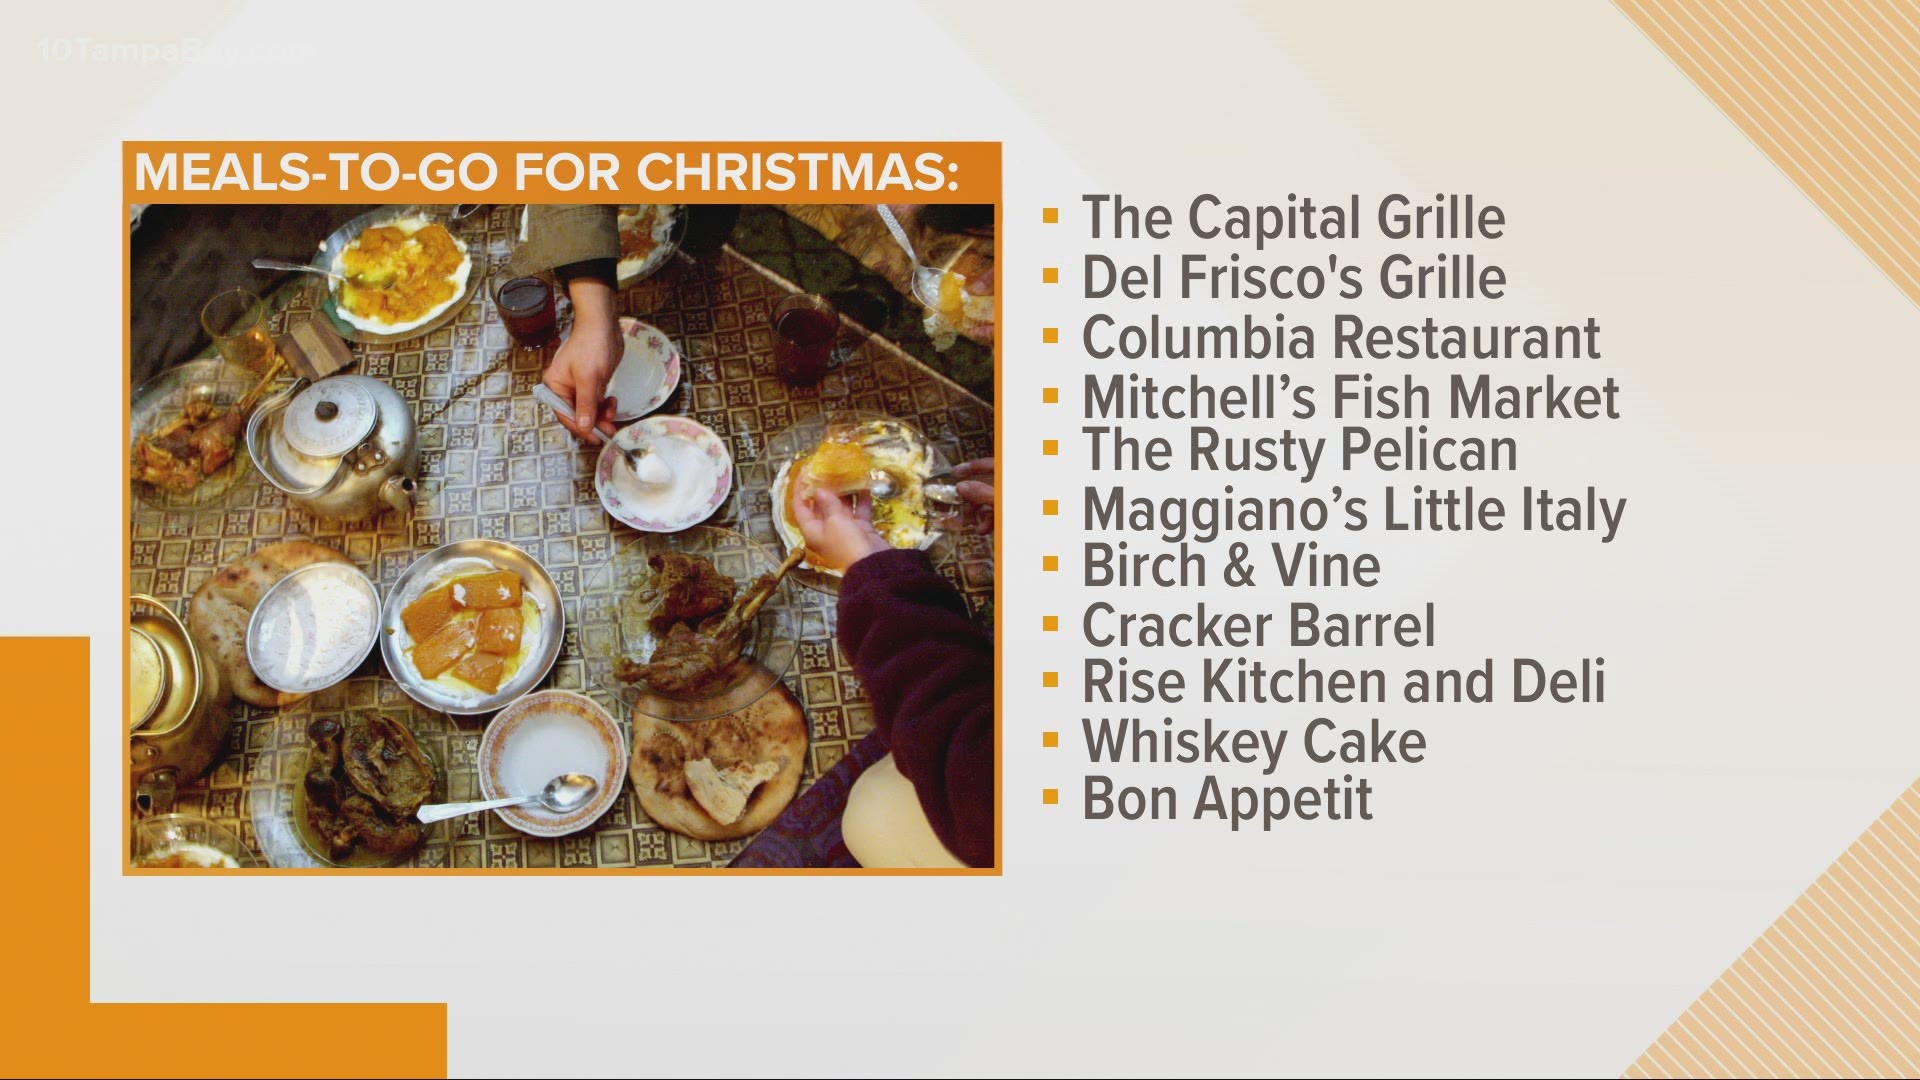 Several restaurants in our area can help you with your Christmas meal.